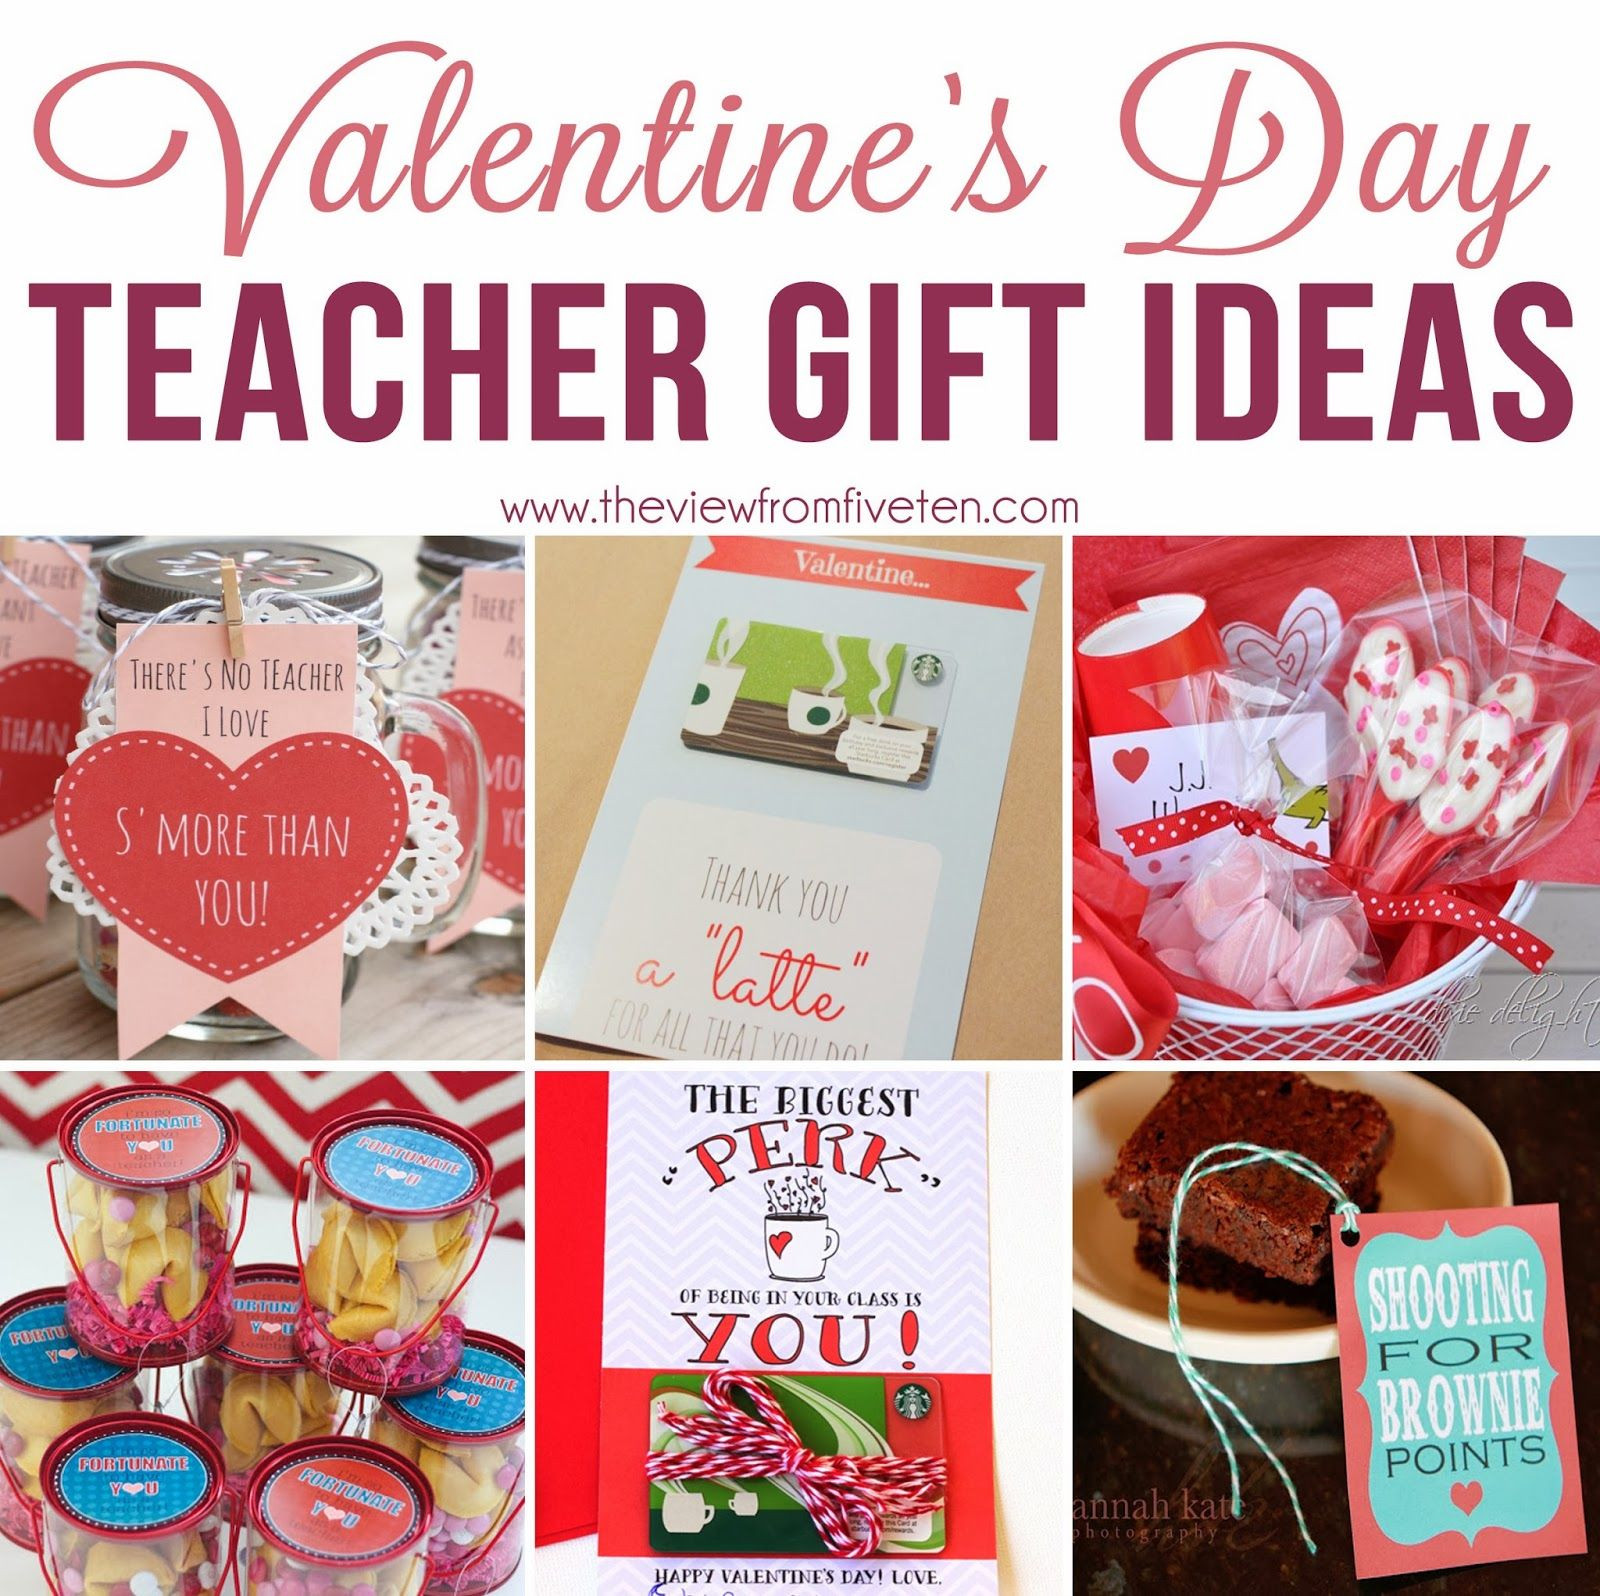 Valentines Gift Ideas For Teachers
 The View From 510 Valentine s Day Gift Ideas for Teachers